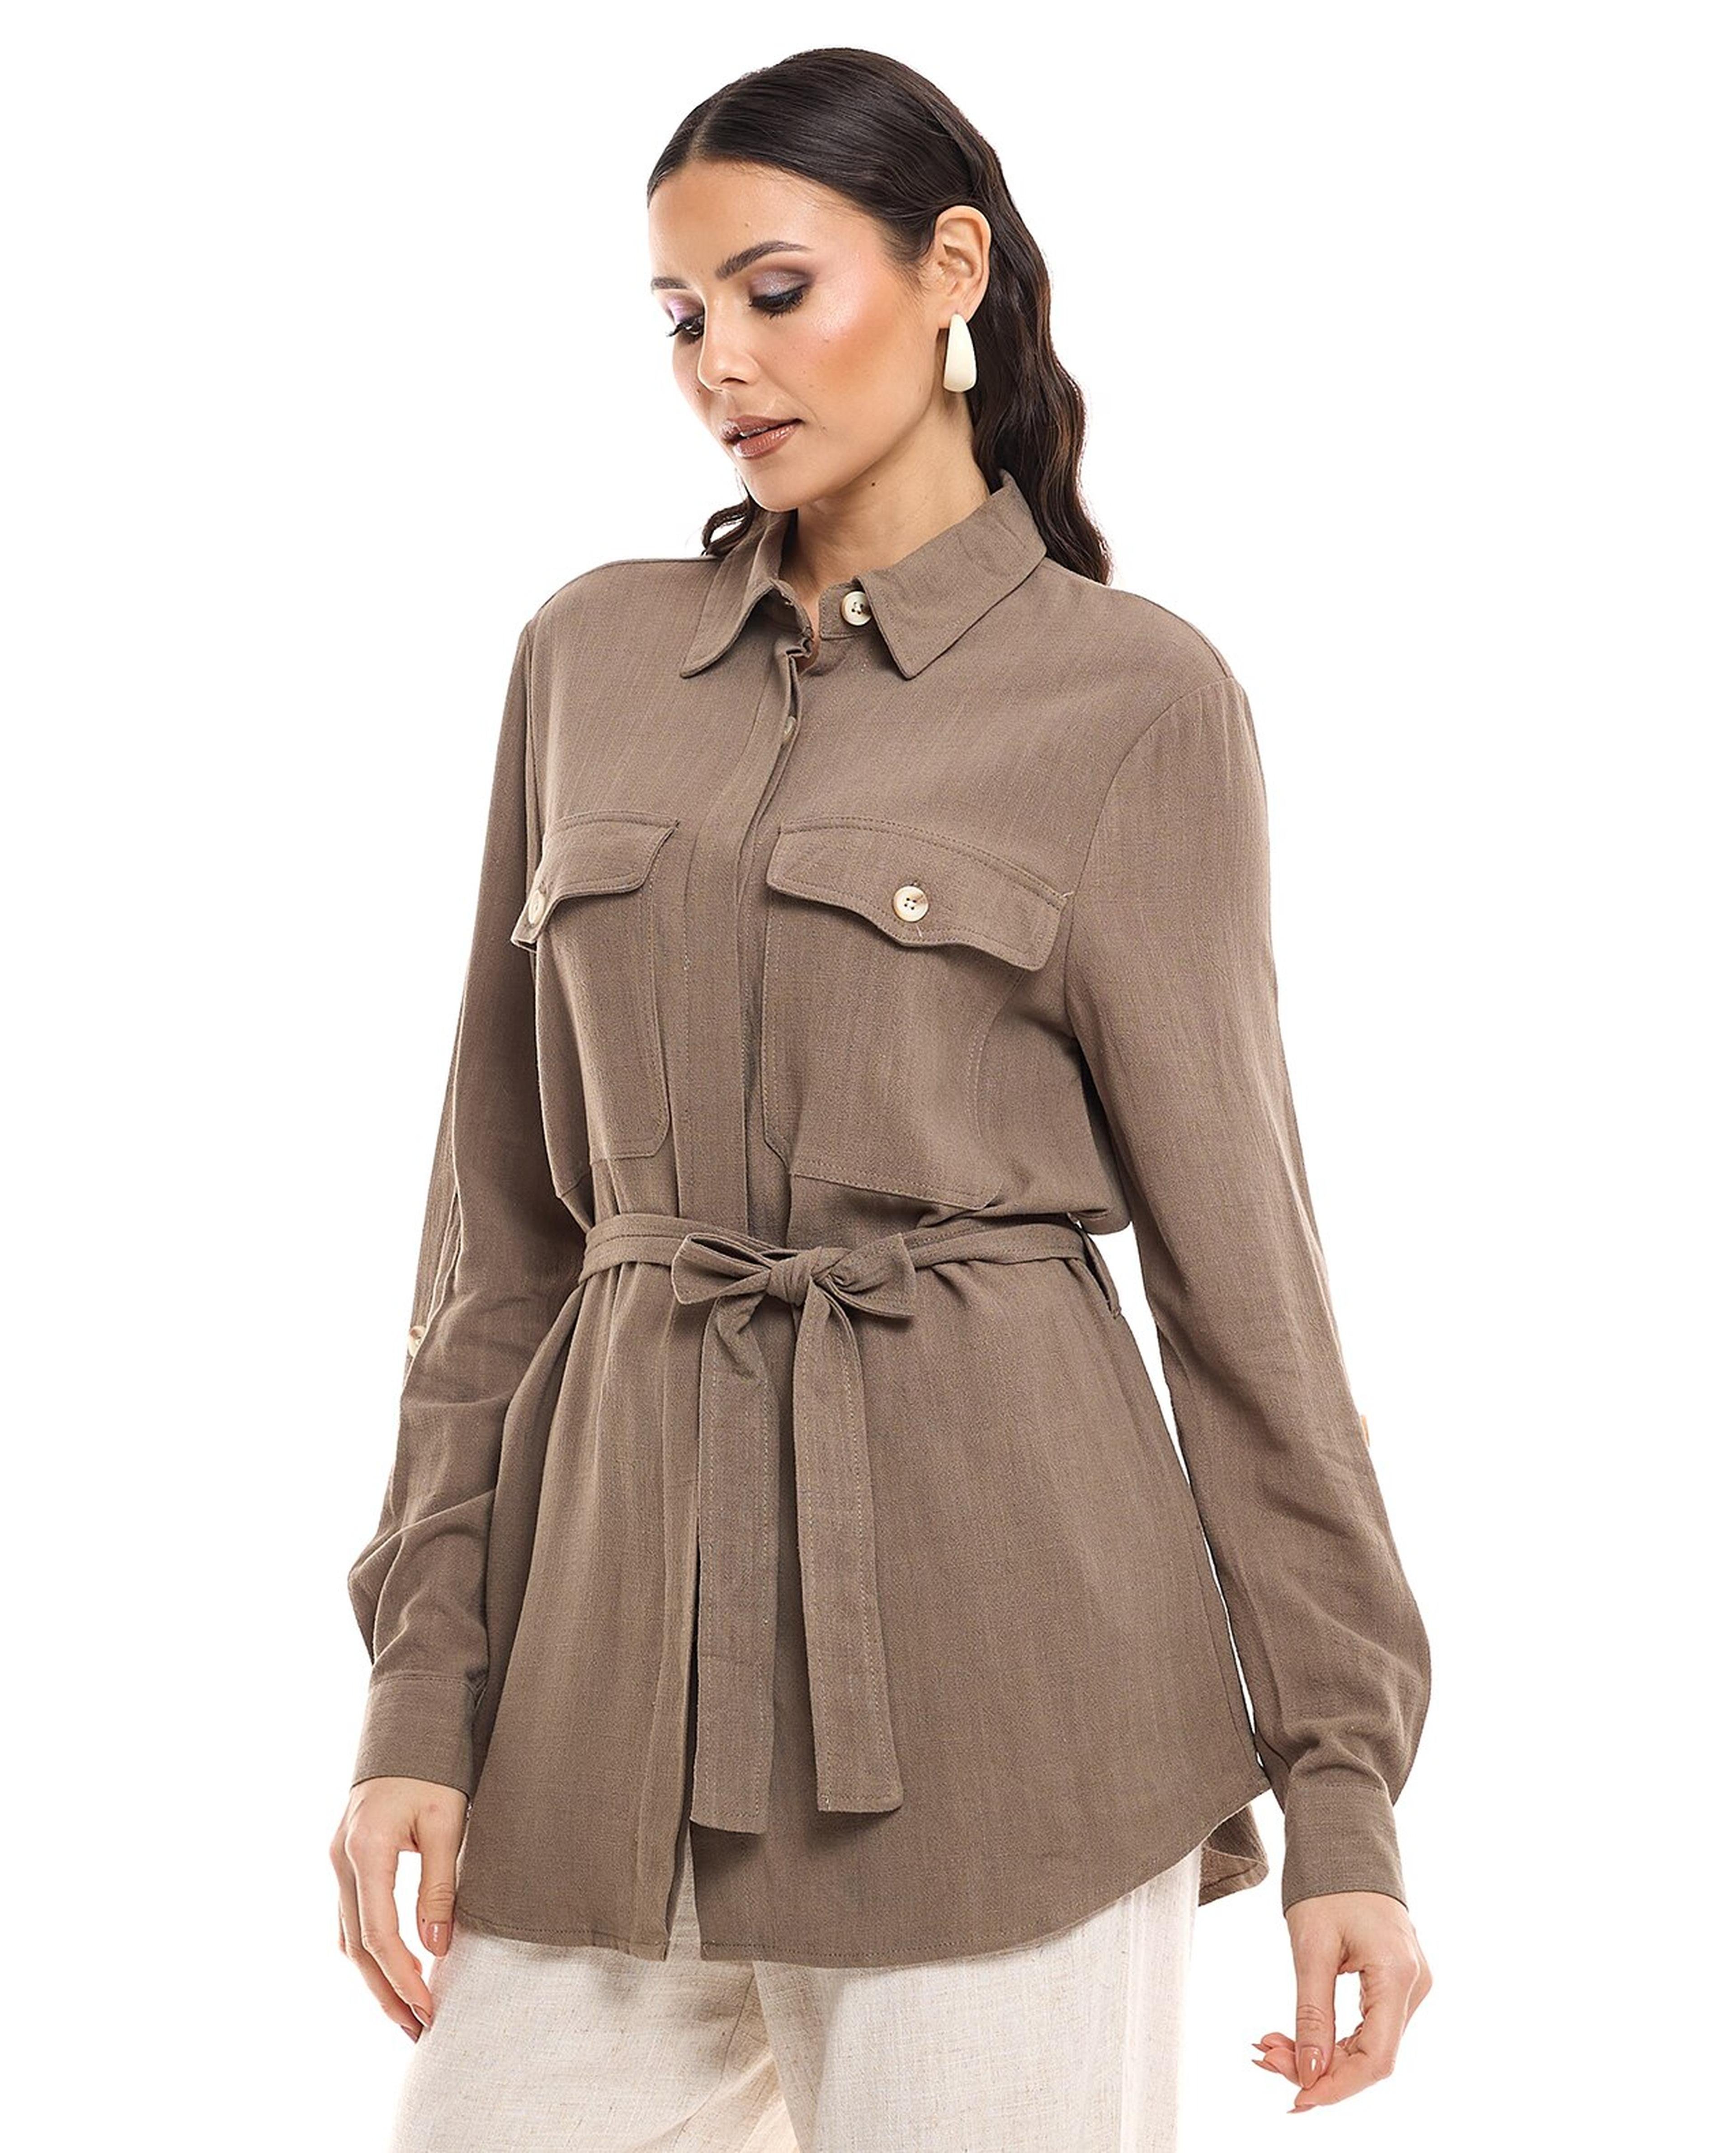 Solid Shirt Tunic with Long Sleeves and Waist Belt